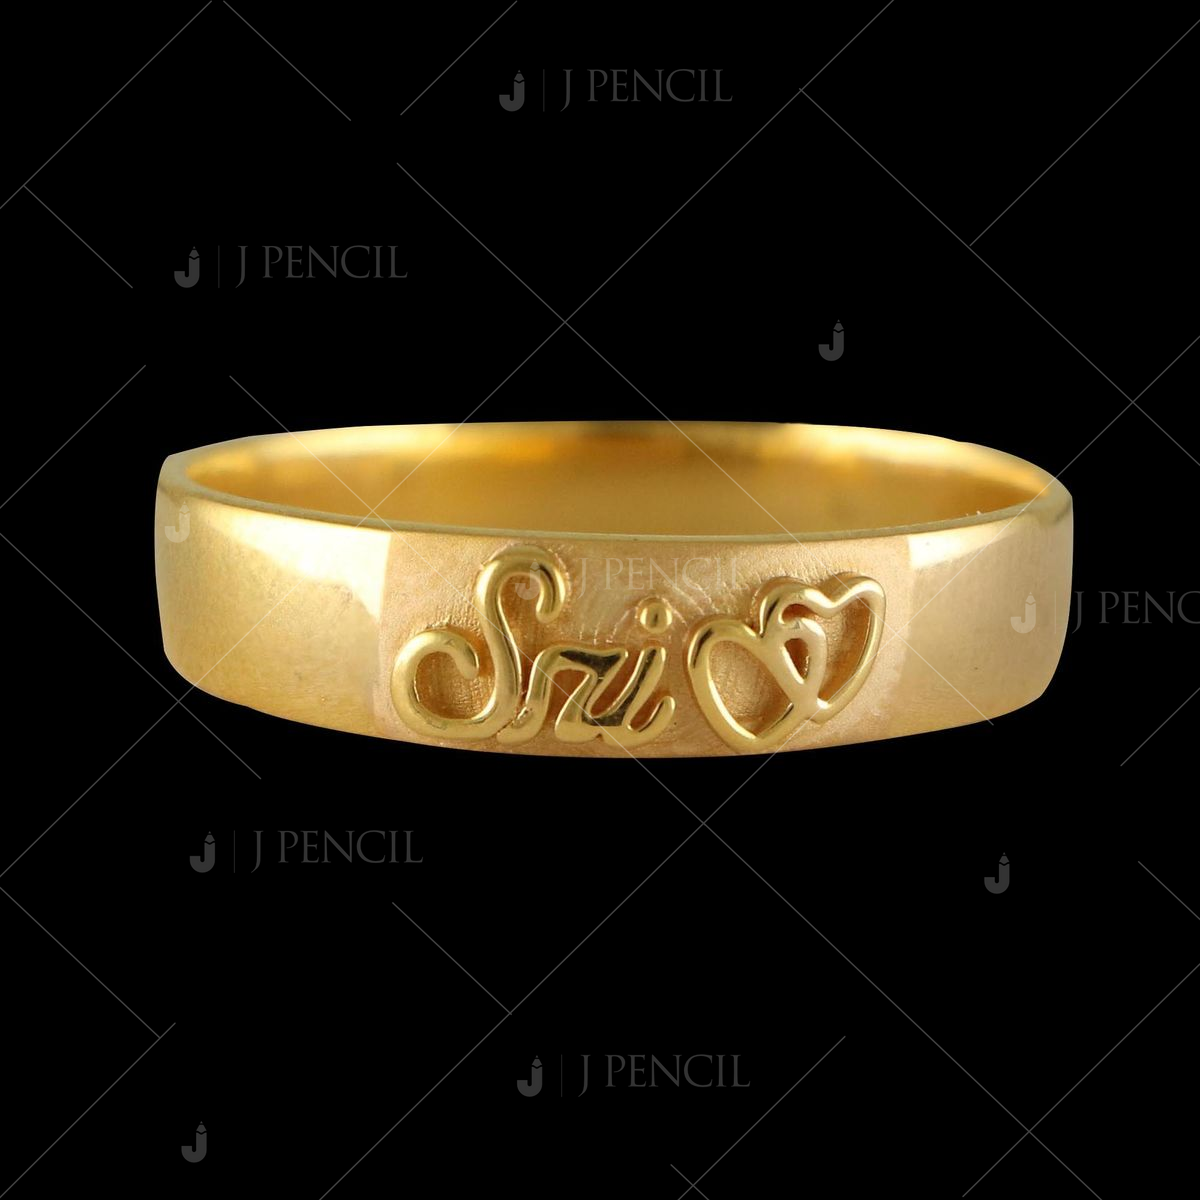 Buy Candere by Kalyan Jewellers 18k Gold Ring Online At Best Price @ Tata  CLiQ